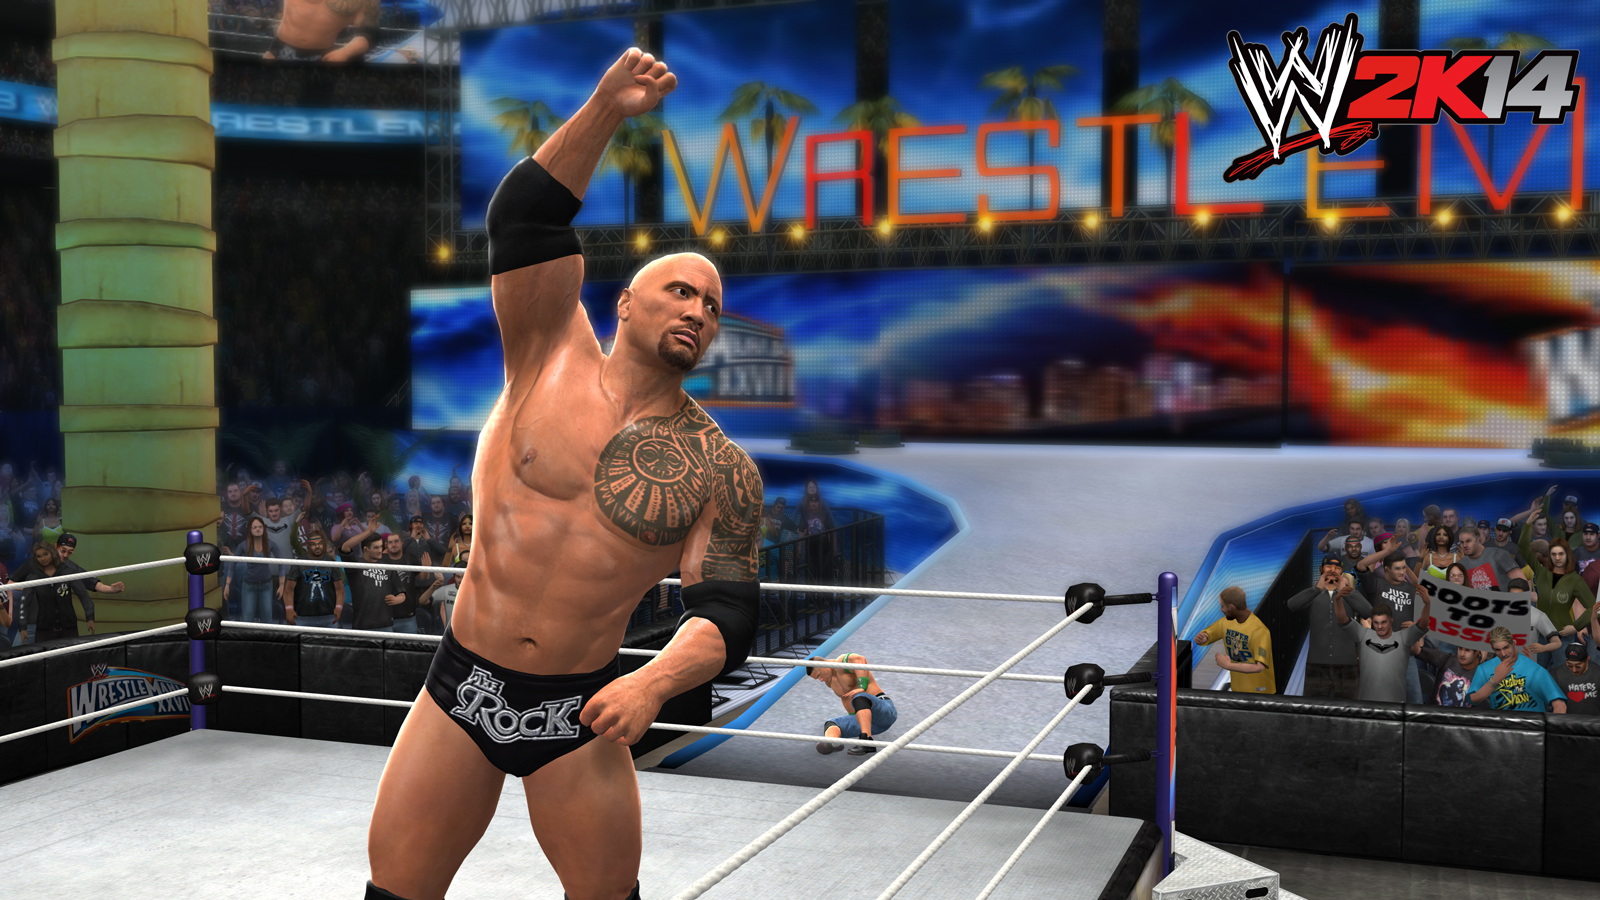 A Huge Roster Delivers ’30 Years Of Wrestlemania’ To WWE 2K14